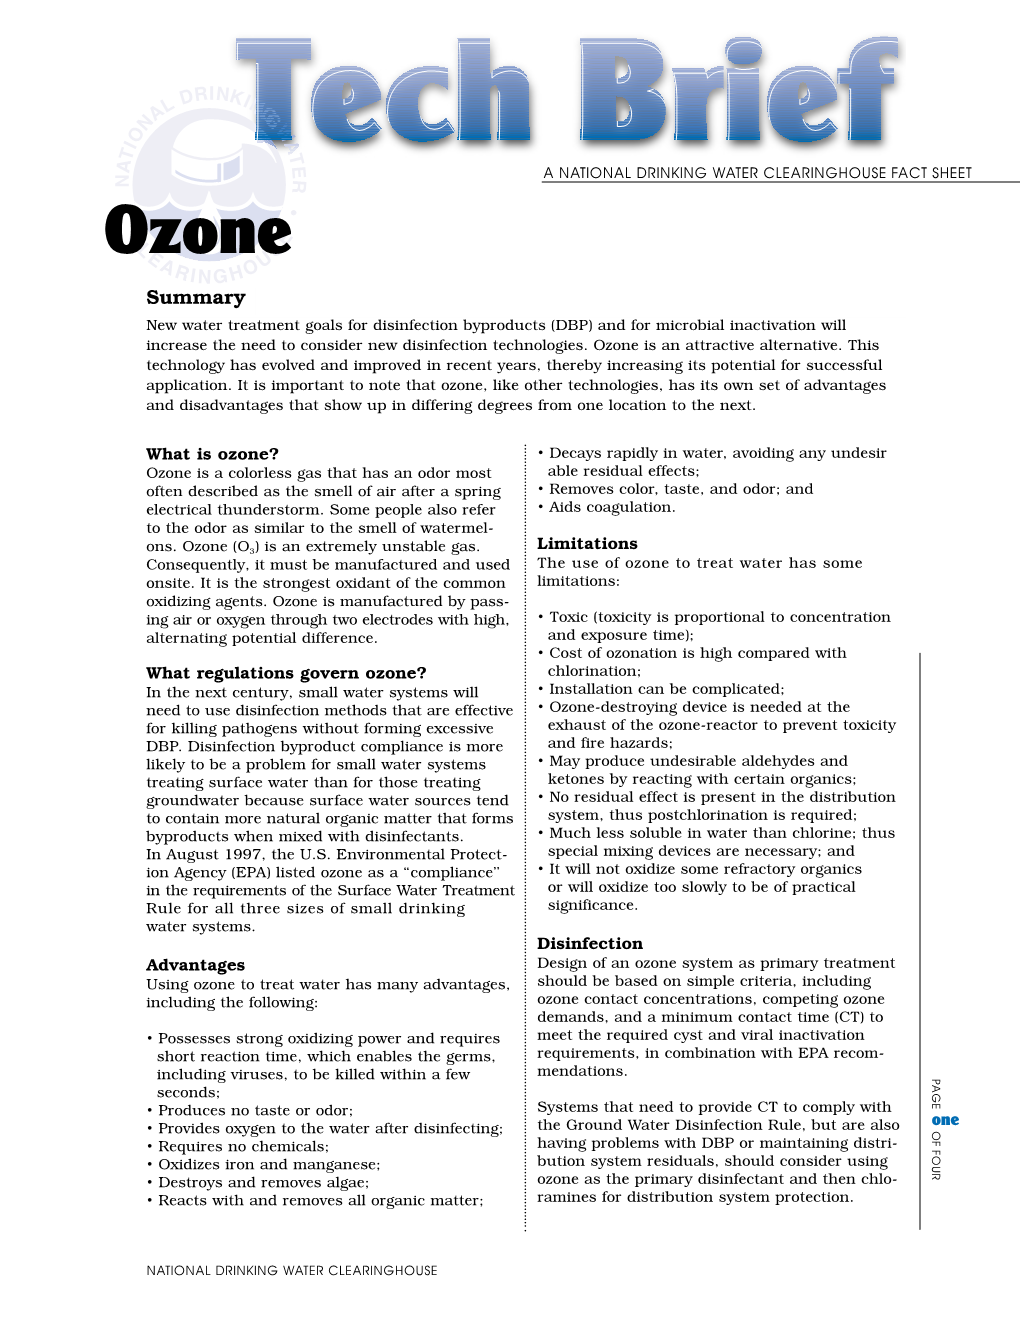 Ozone in Water Treatment: Application Waterin Treatment: Ozone